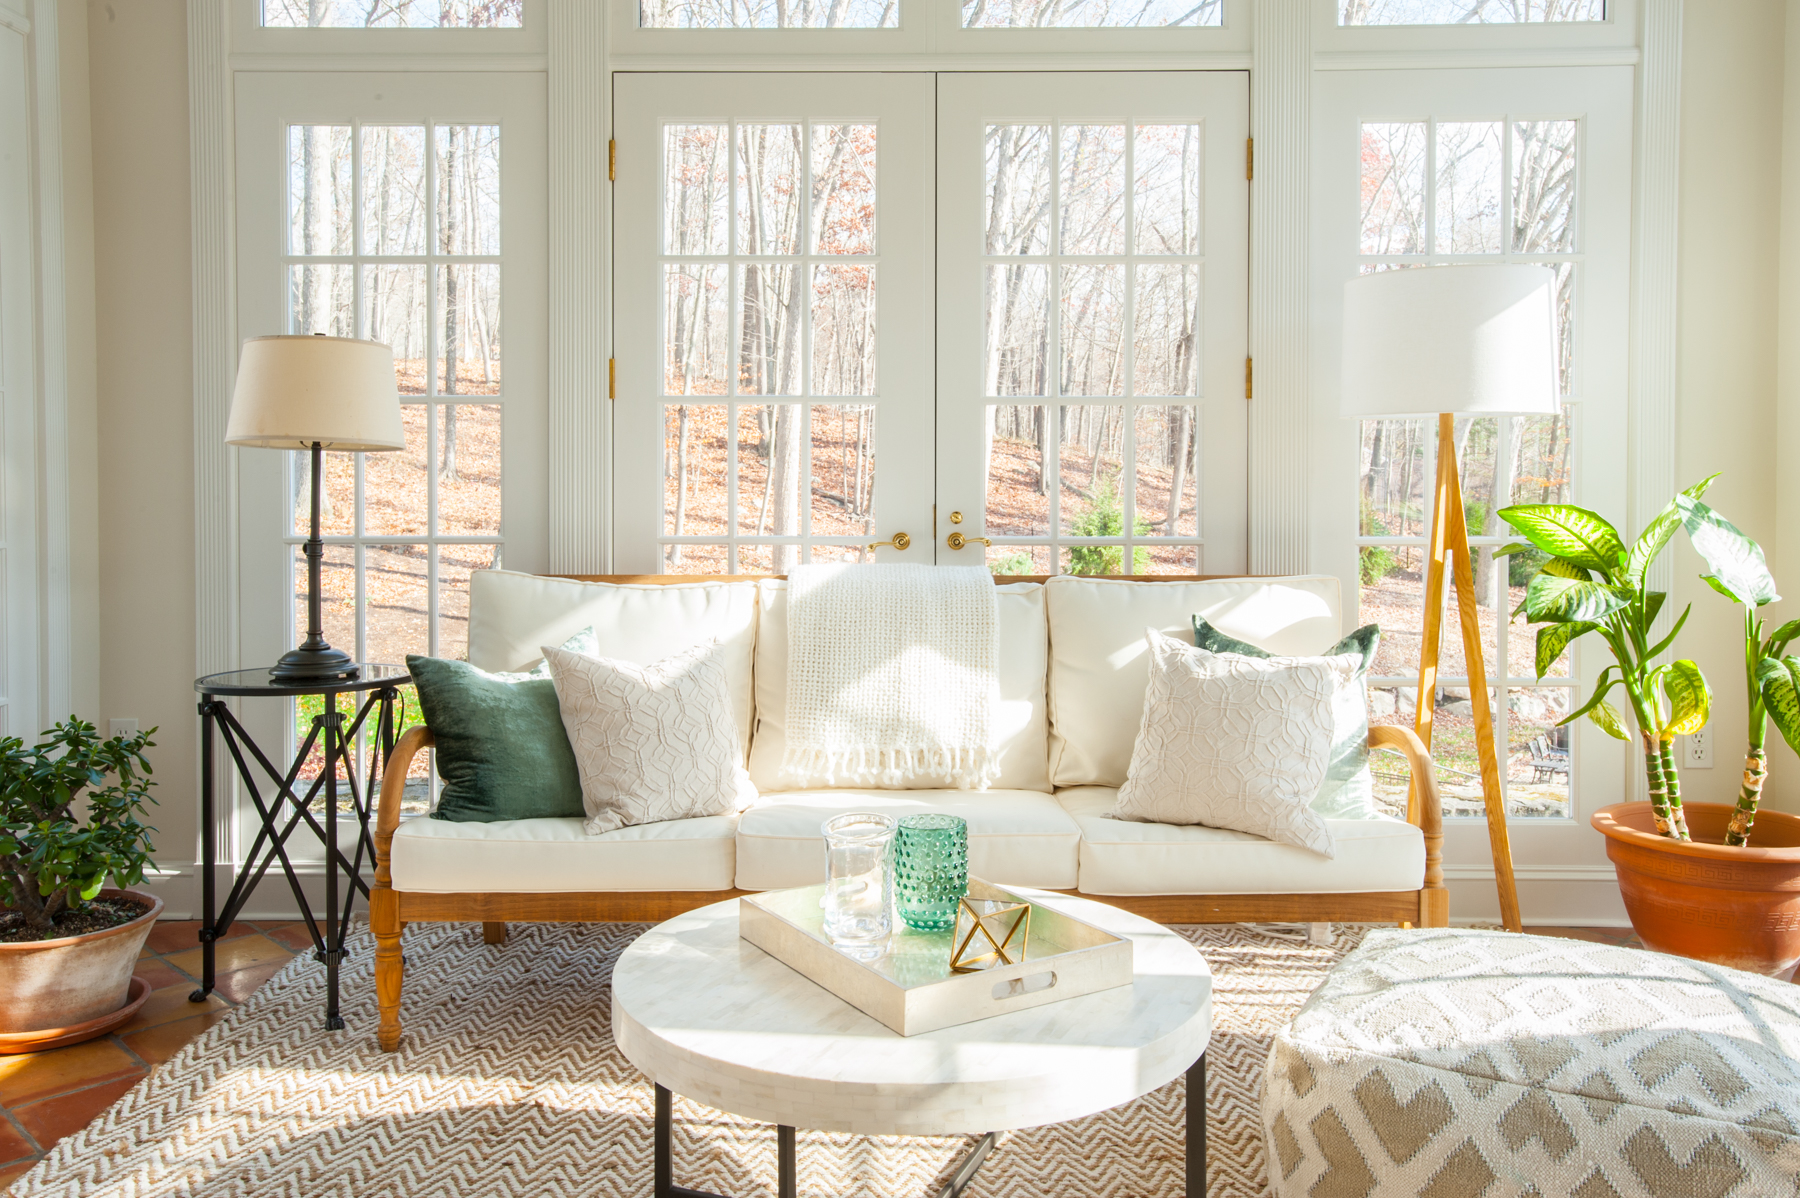 Natural light and interior design go hand in hand.